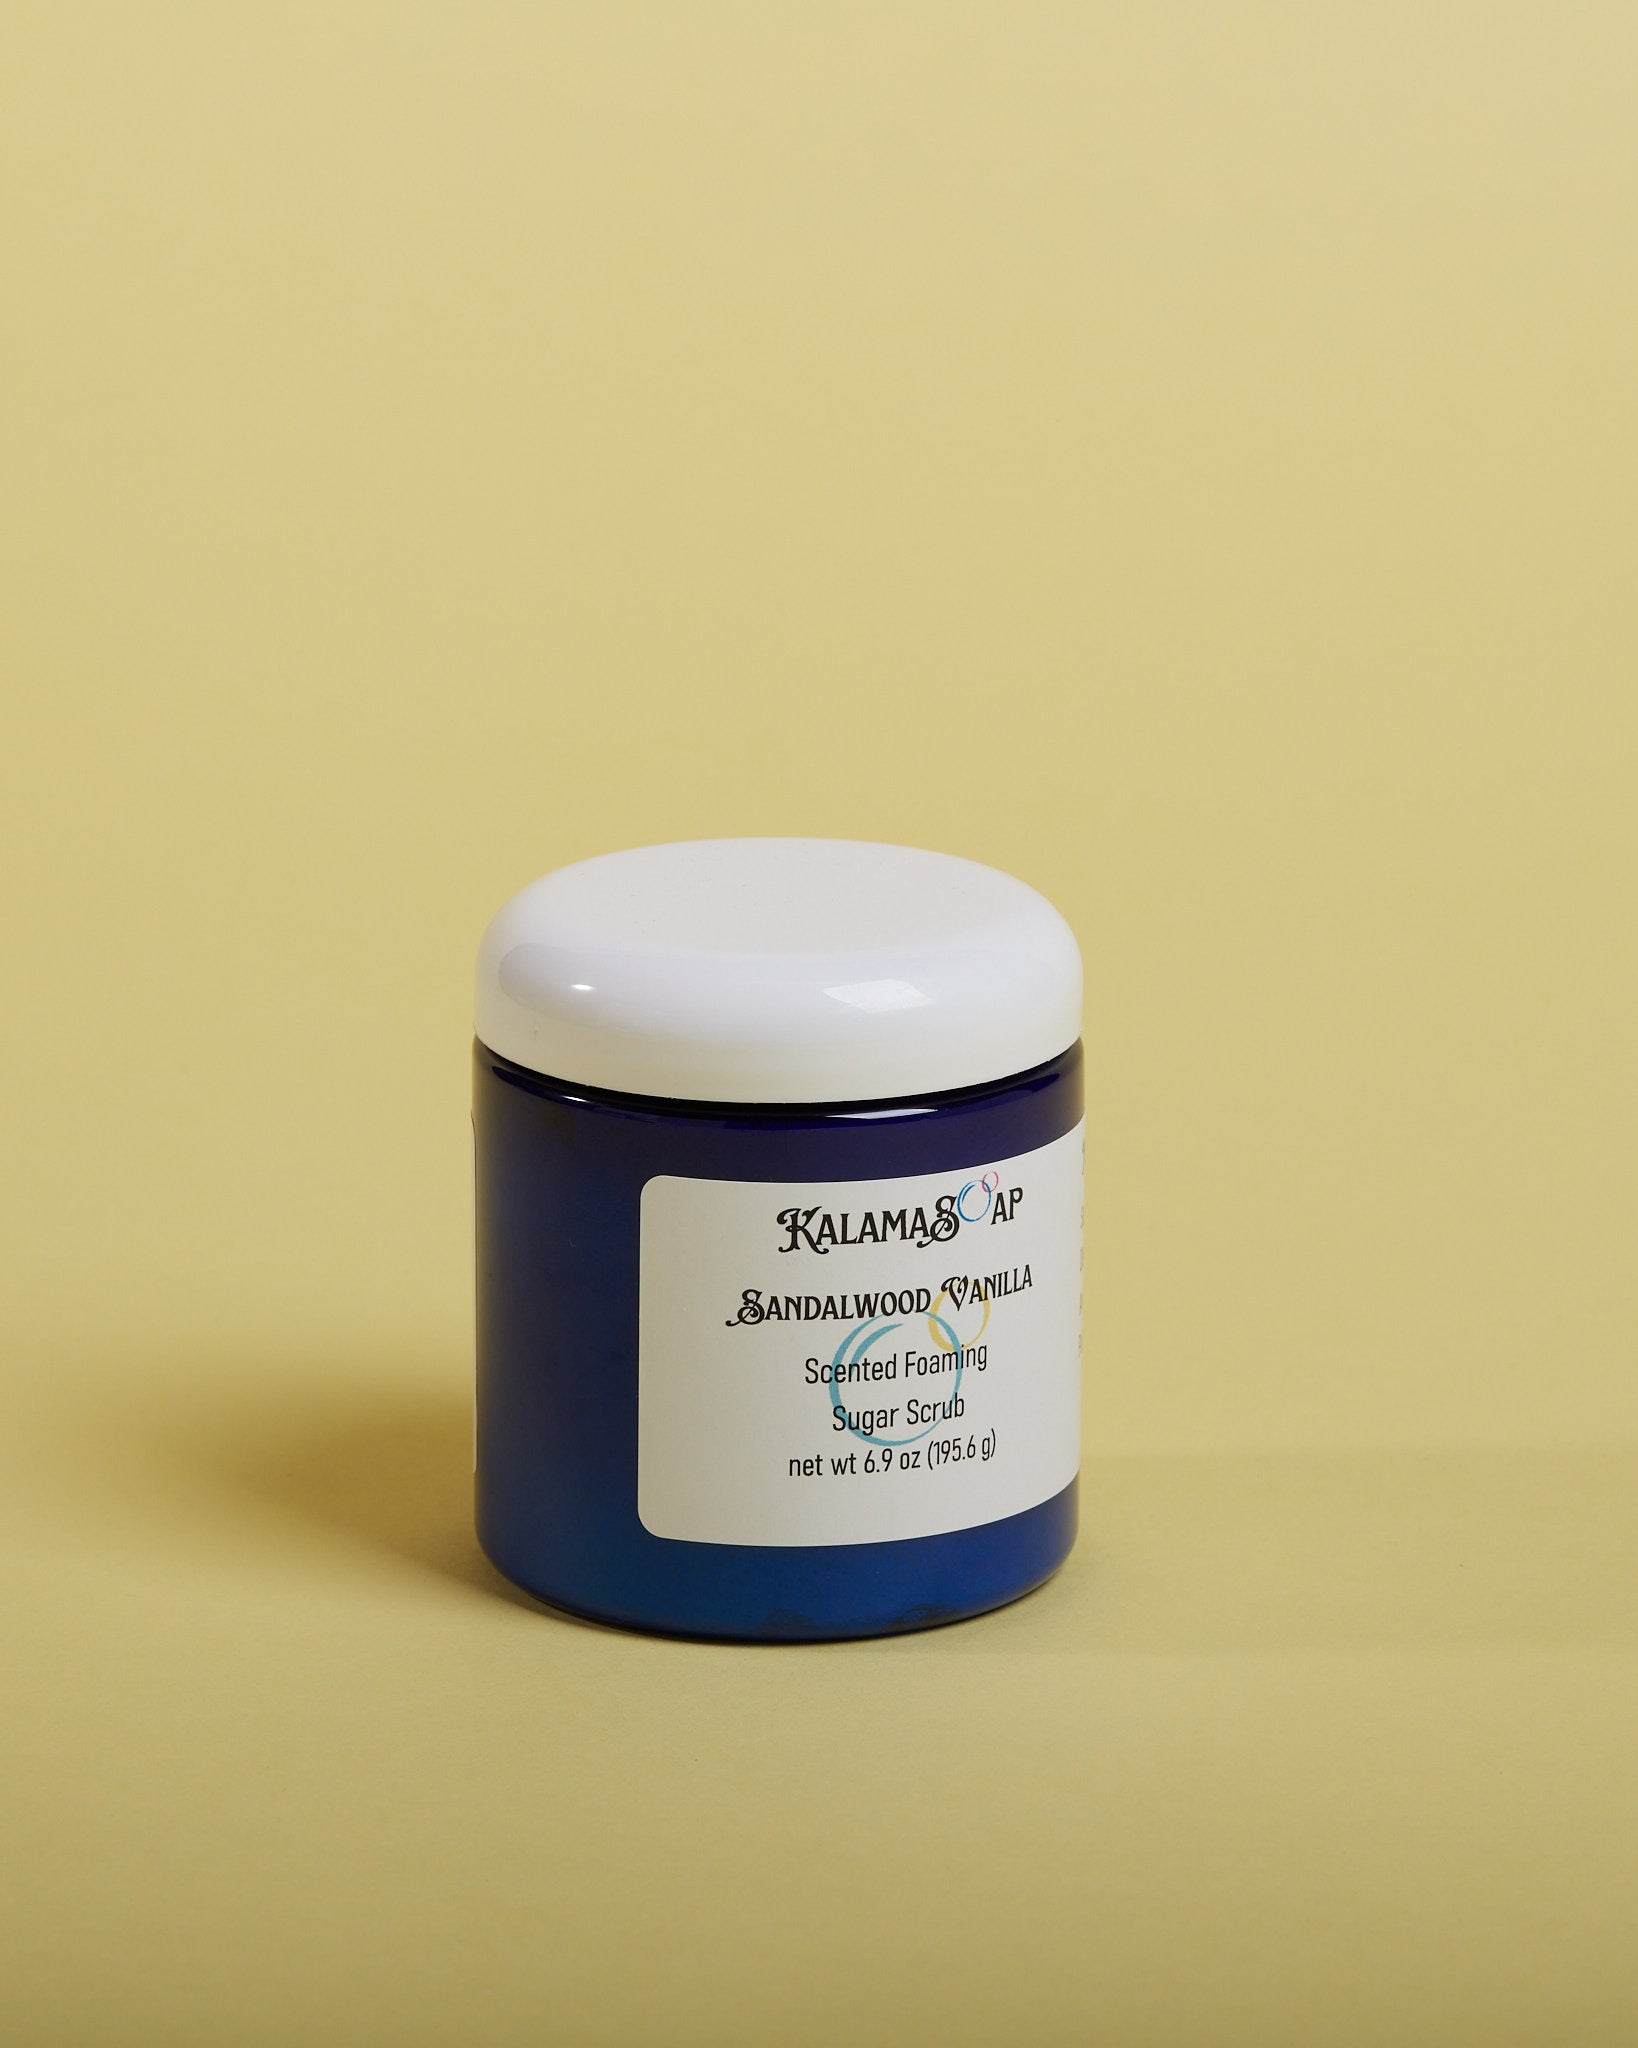 A photo of a 6.9 ounce blue plastic jar with white dome lids on a yellow background labeled KalamaSoap Sandalwood Vanilla Scented Foaming Sugar Scrub